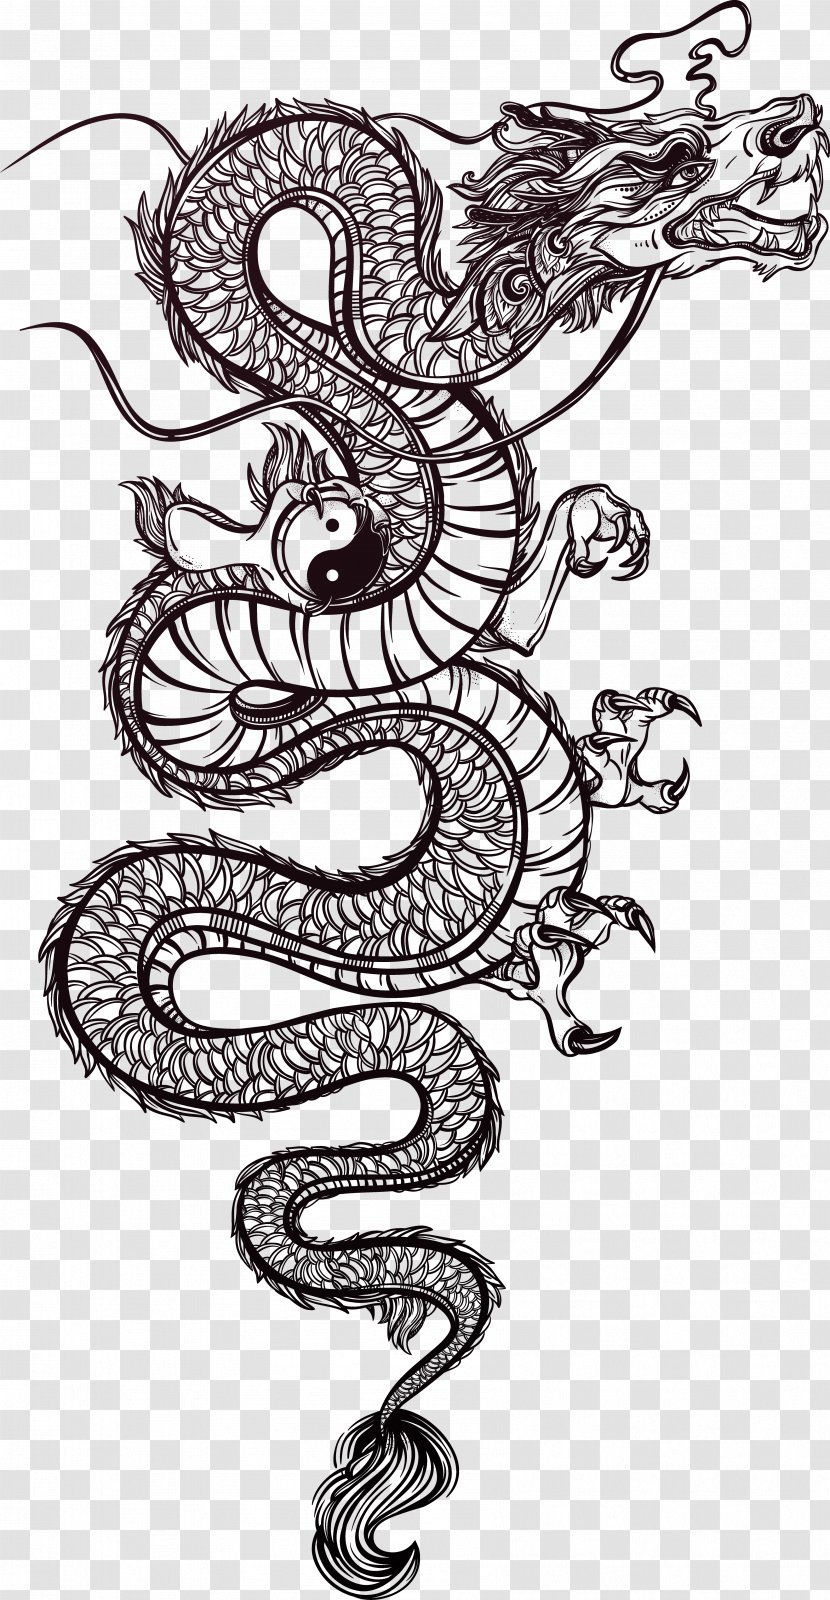 Chinese Dragon Tattoo Illustration - Flower - Hand-painted Vector ...